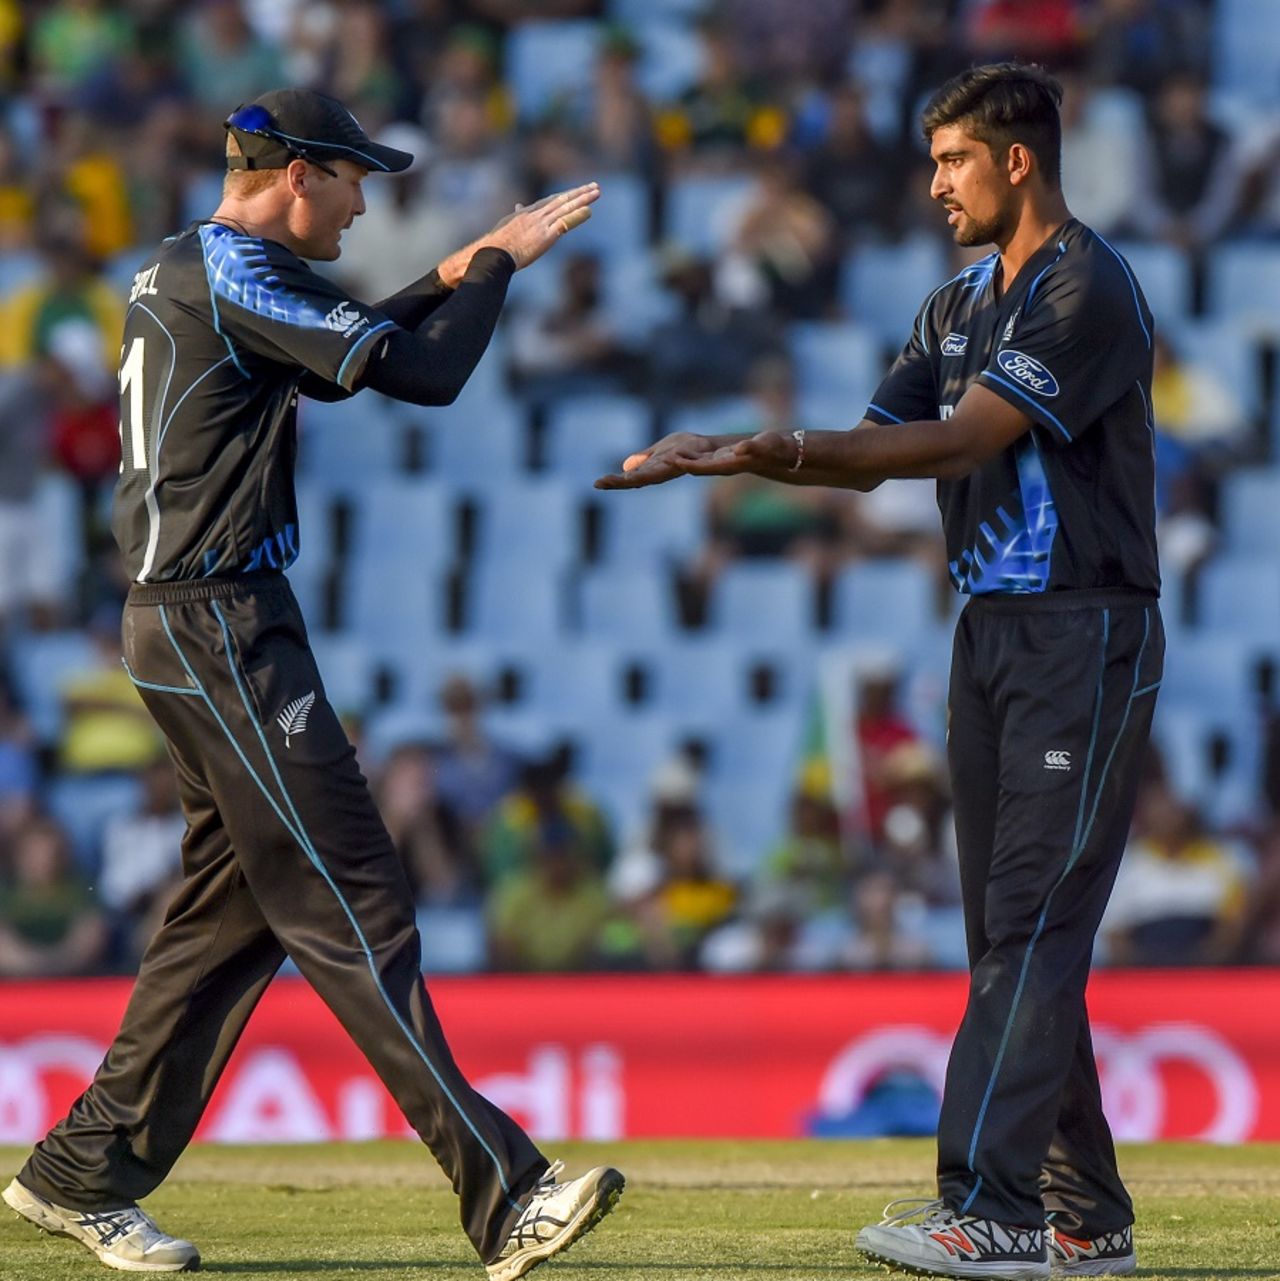 Ish Sodhi is congratulated by Martin Guptill after he dismissed David Wiese, South Africa v New Zealand, 2nd T20I, Centurion, August 16, 2015 